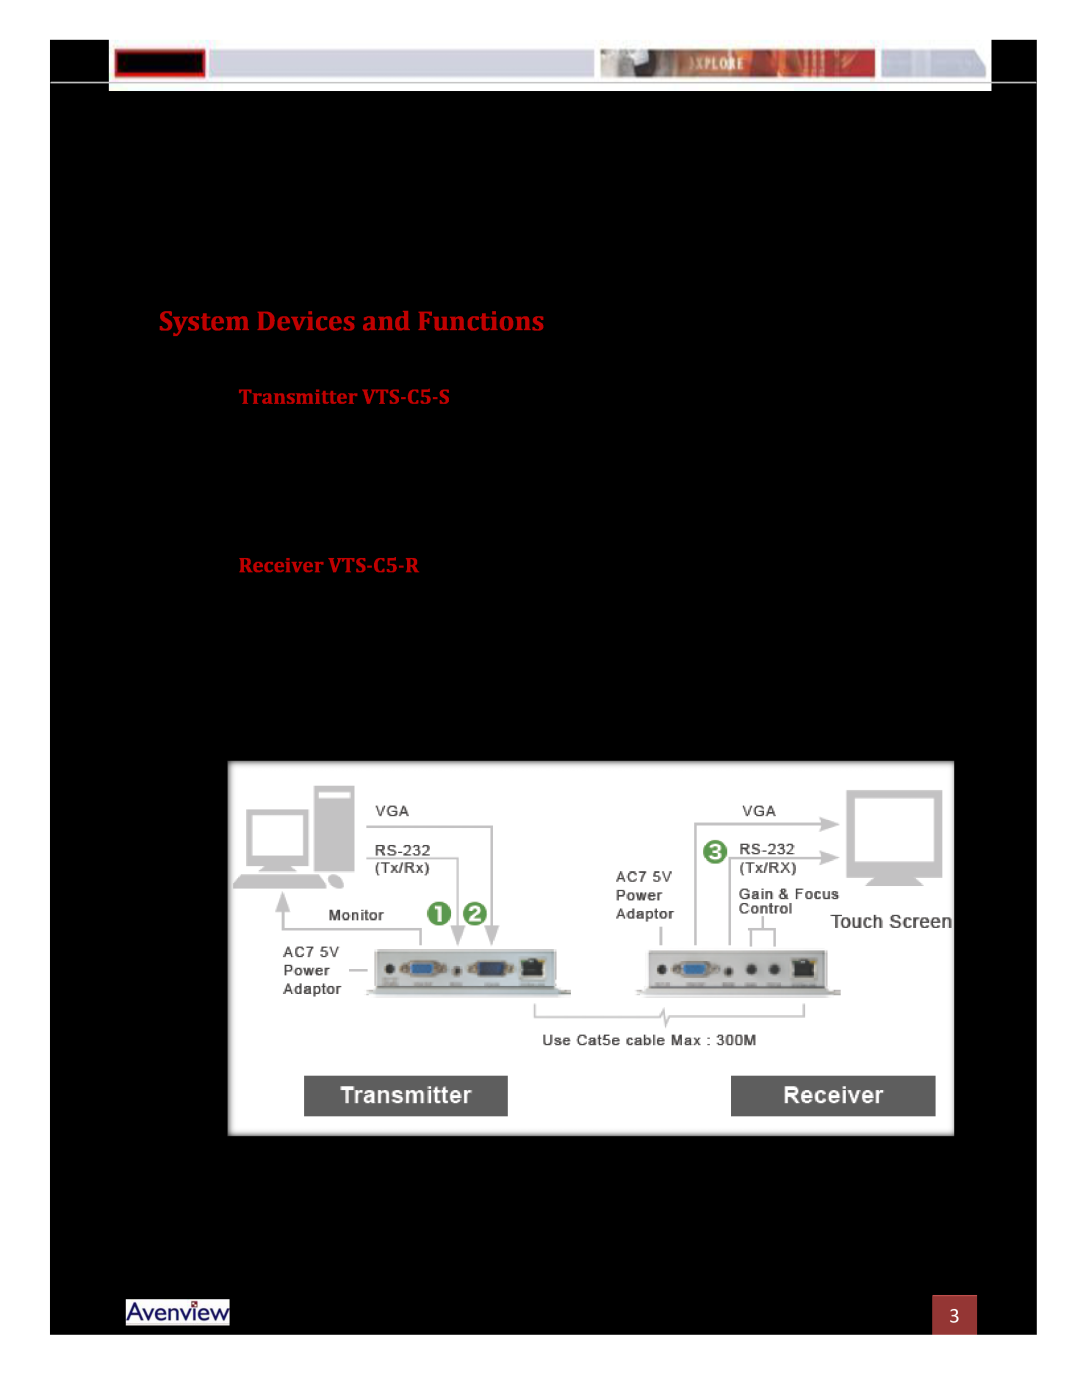 Avenview manual System Devices and Functions, Transmitter VTS-C5-S, Receiver VTS-C5-R 